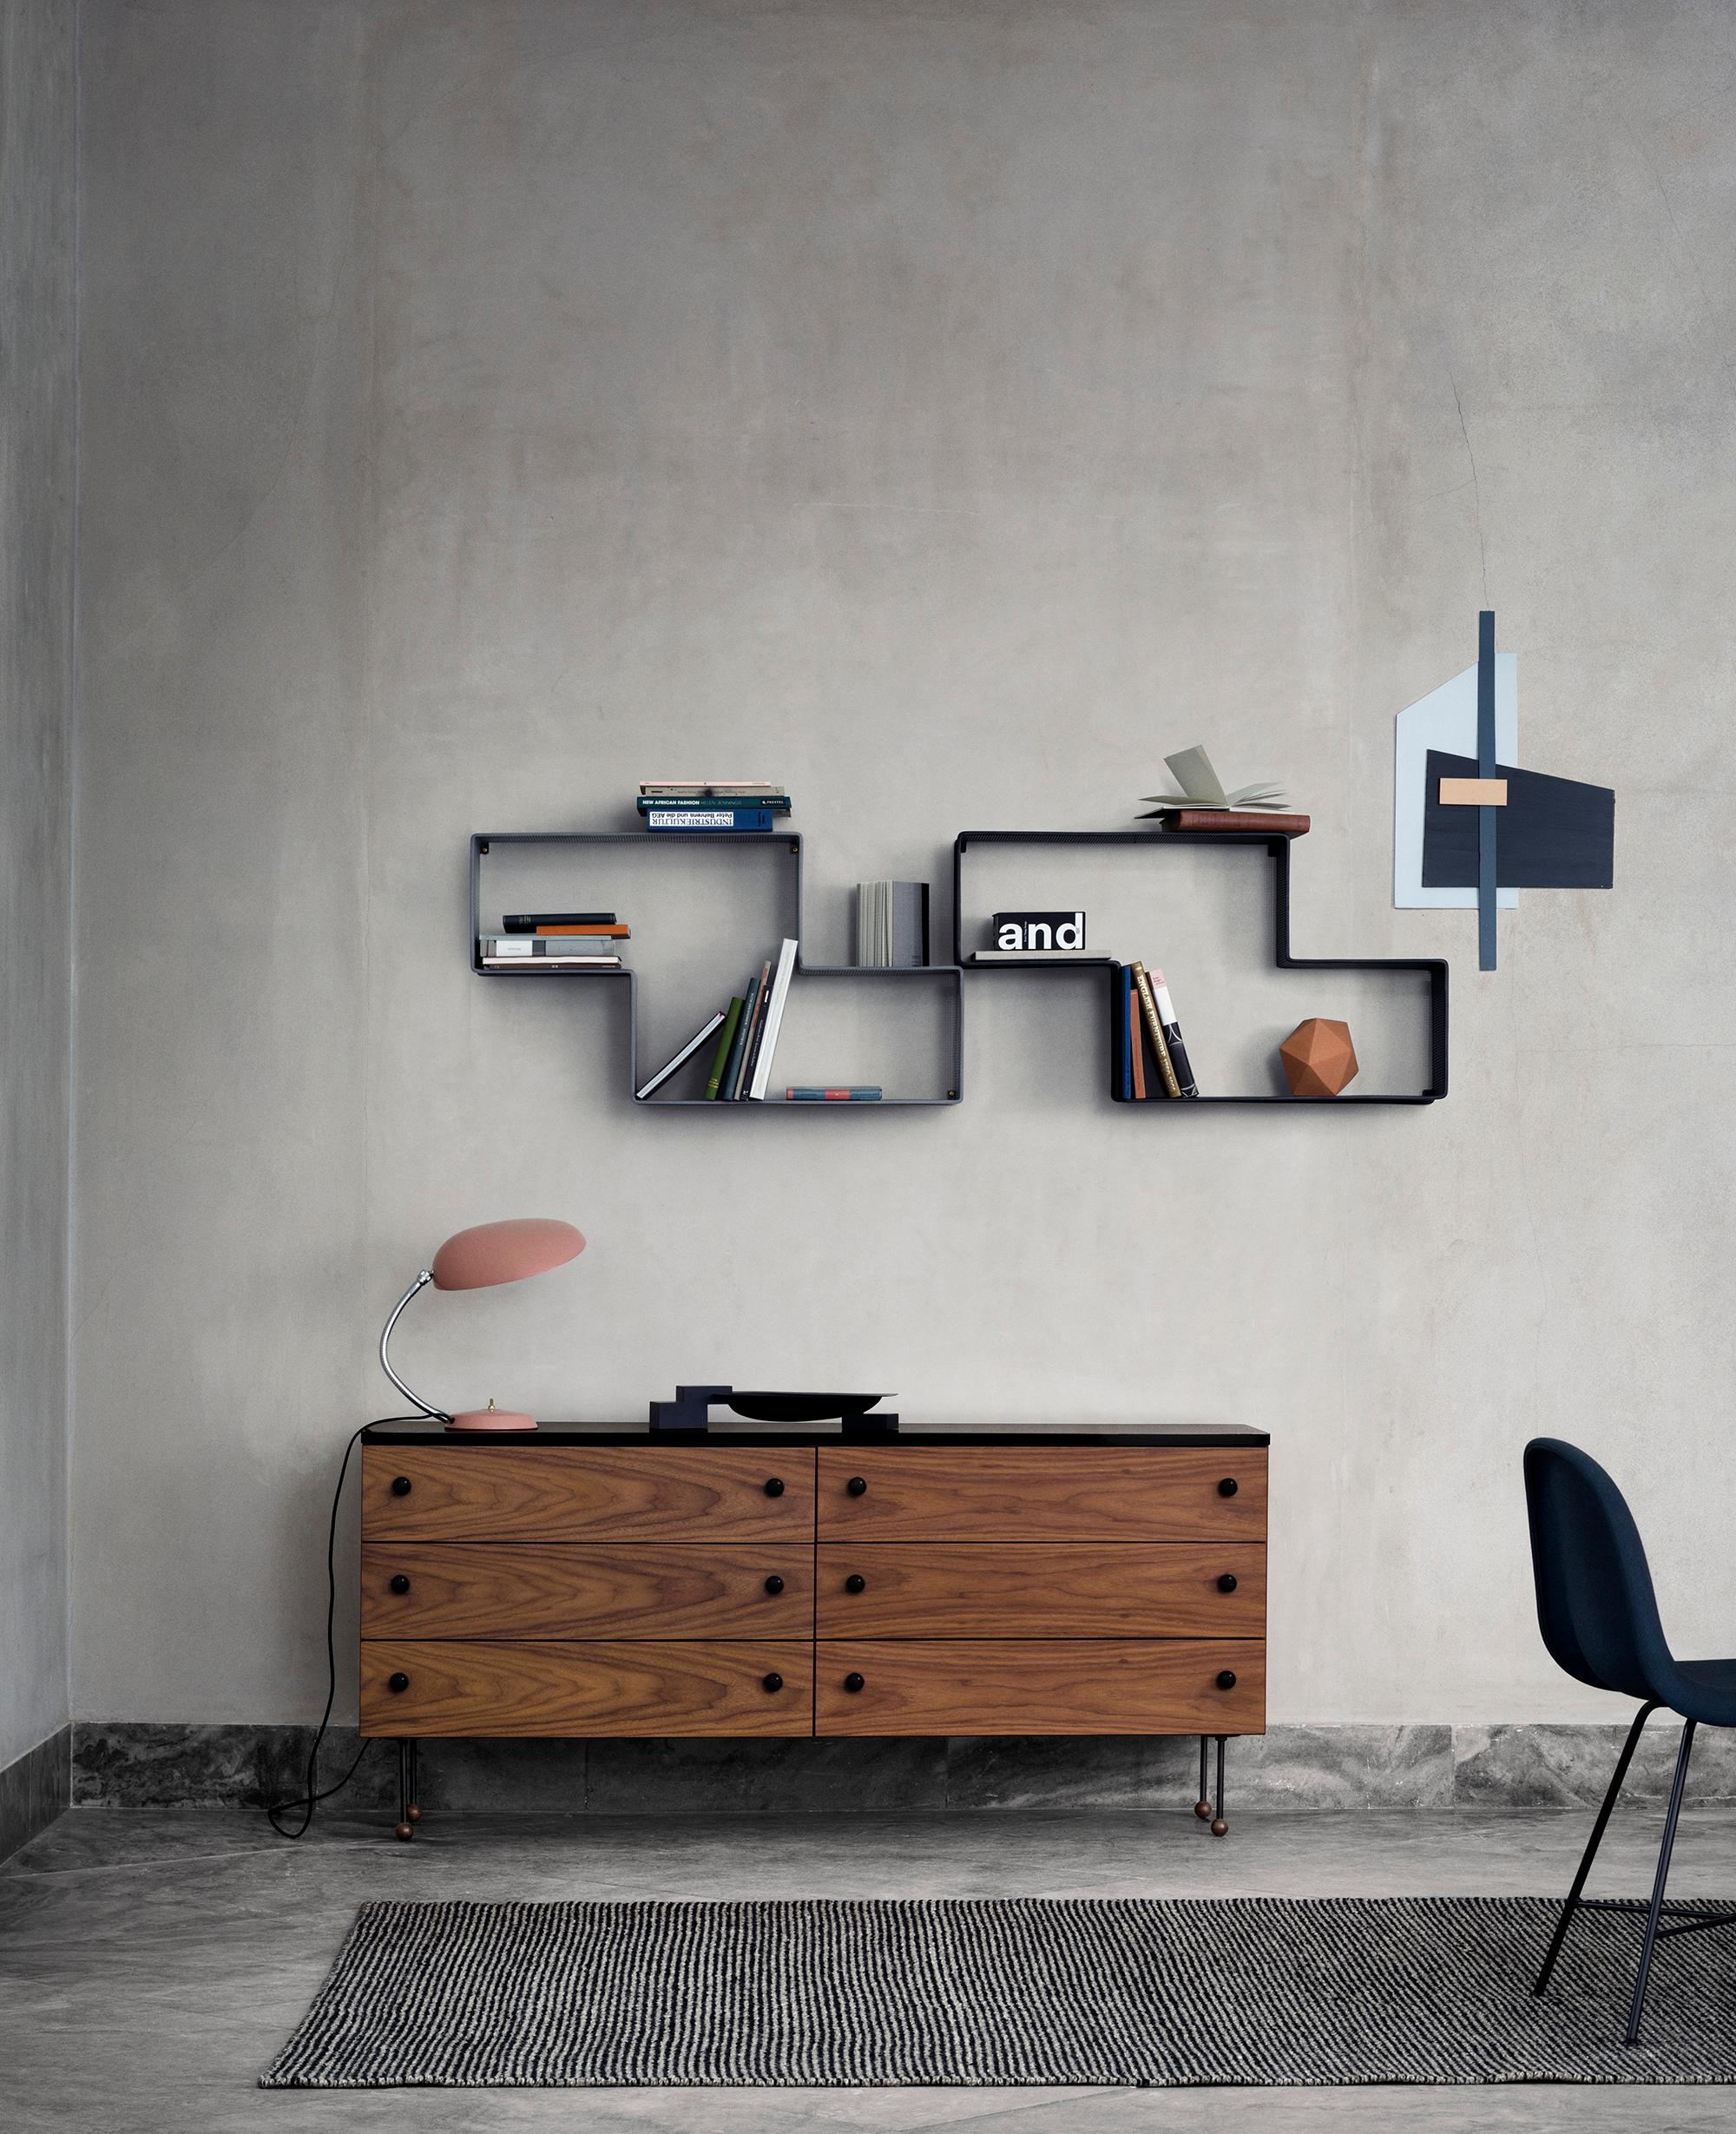 Mathieu Matégot 'Dédal' shelf for GUBI in Black.

Originally designed by Mathieu Matégot in 1955, the Dédal shelf is an authorized re-edition by GUBI. Executed using Matégot's Rigitulle method of connected steel tubes and perforated metal sheets.